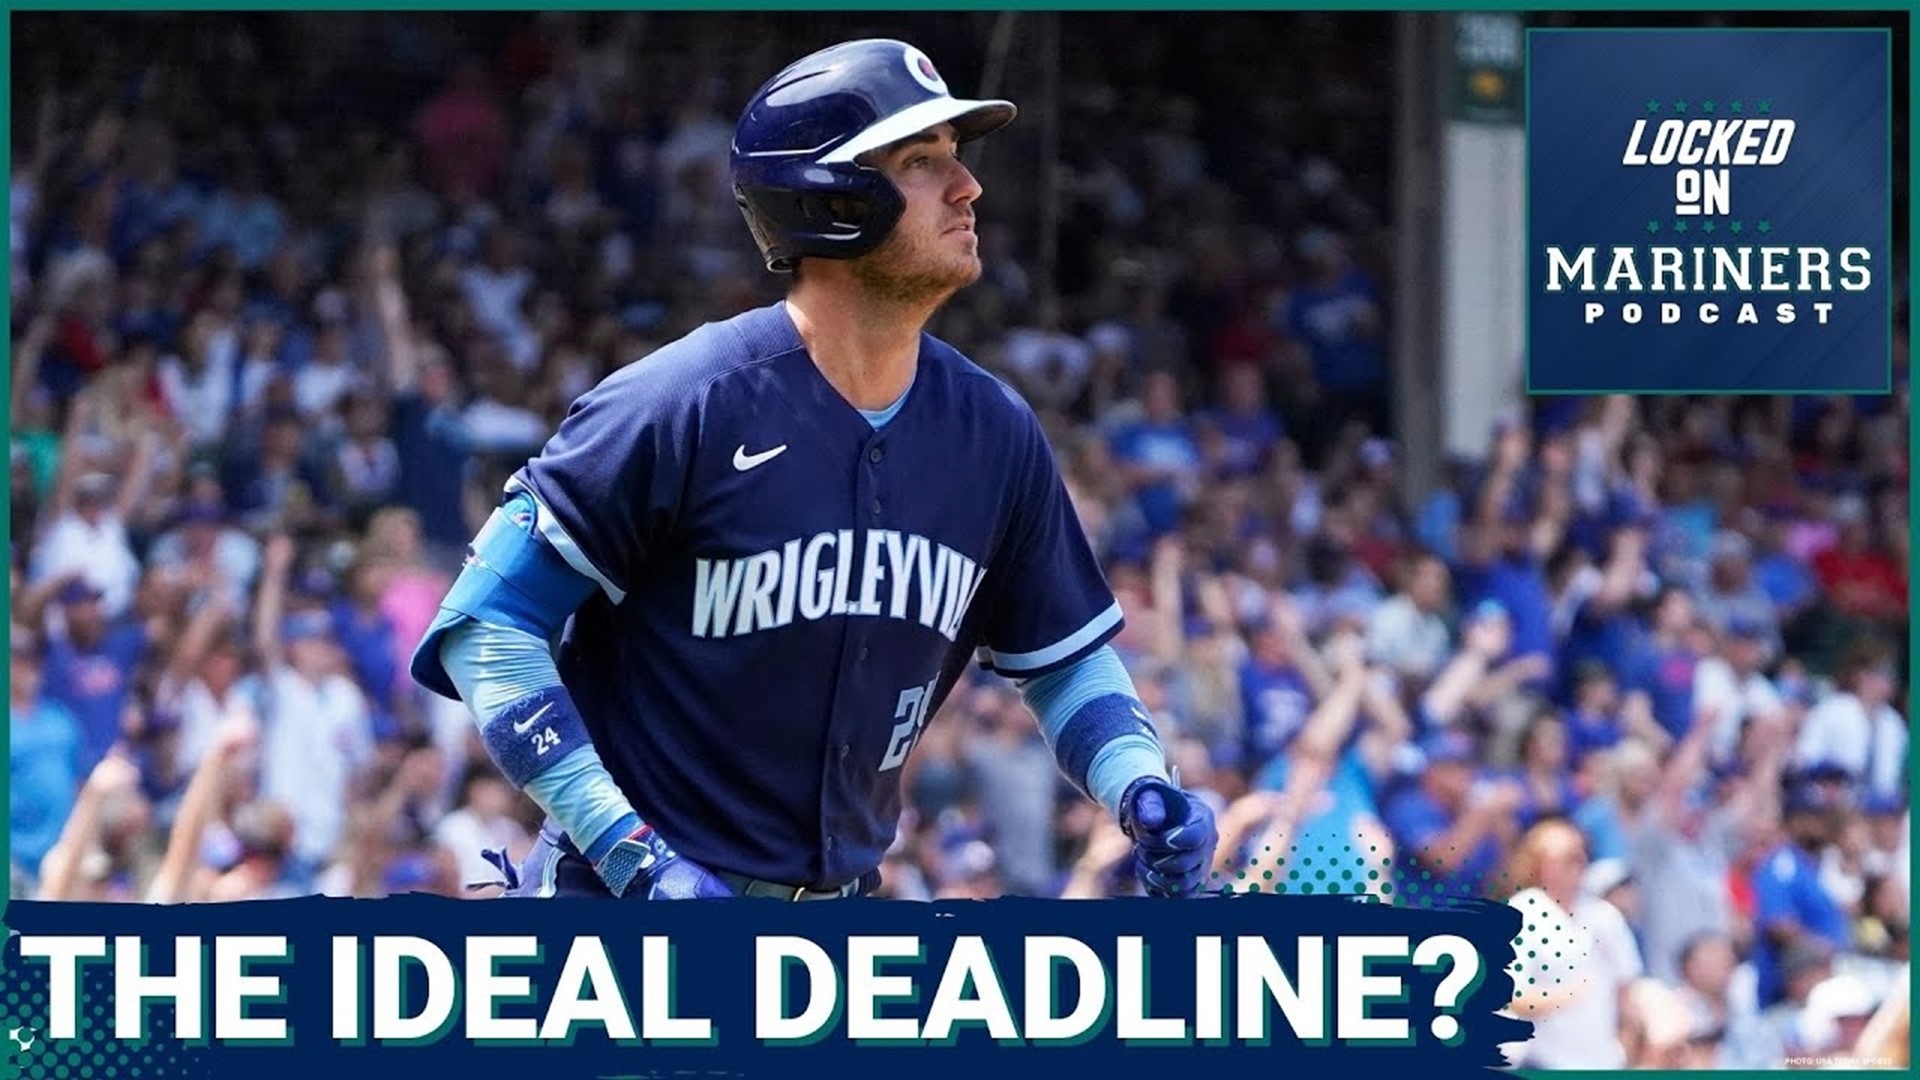 The Mariners dropped another heartbreaker last night, and while Scott Servais wasn't the main culprit, he did make another questionable decision.